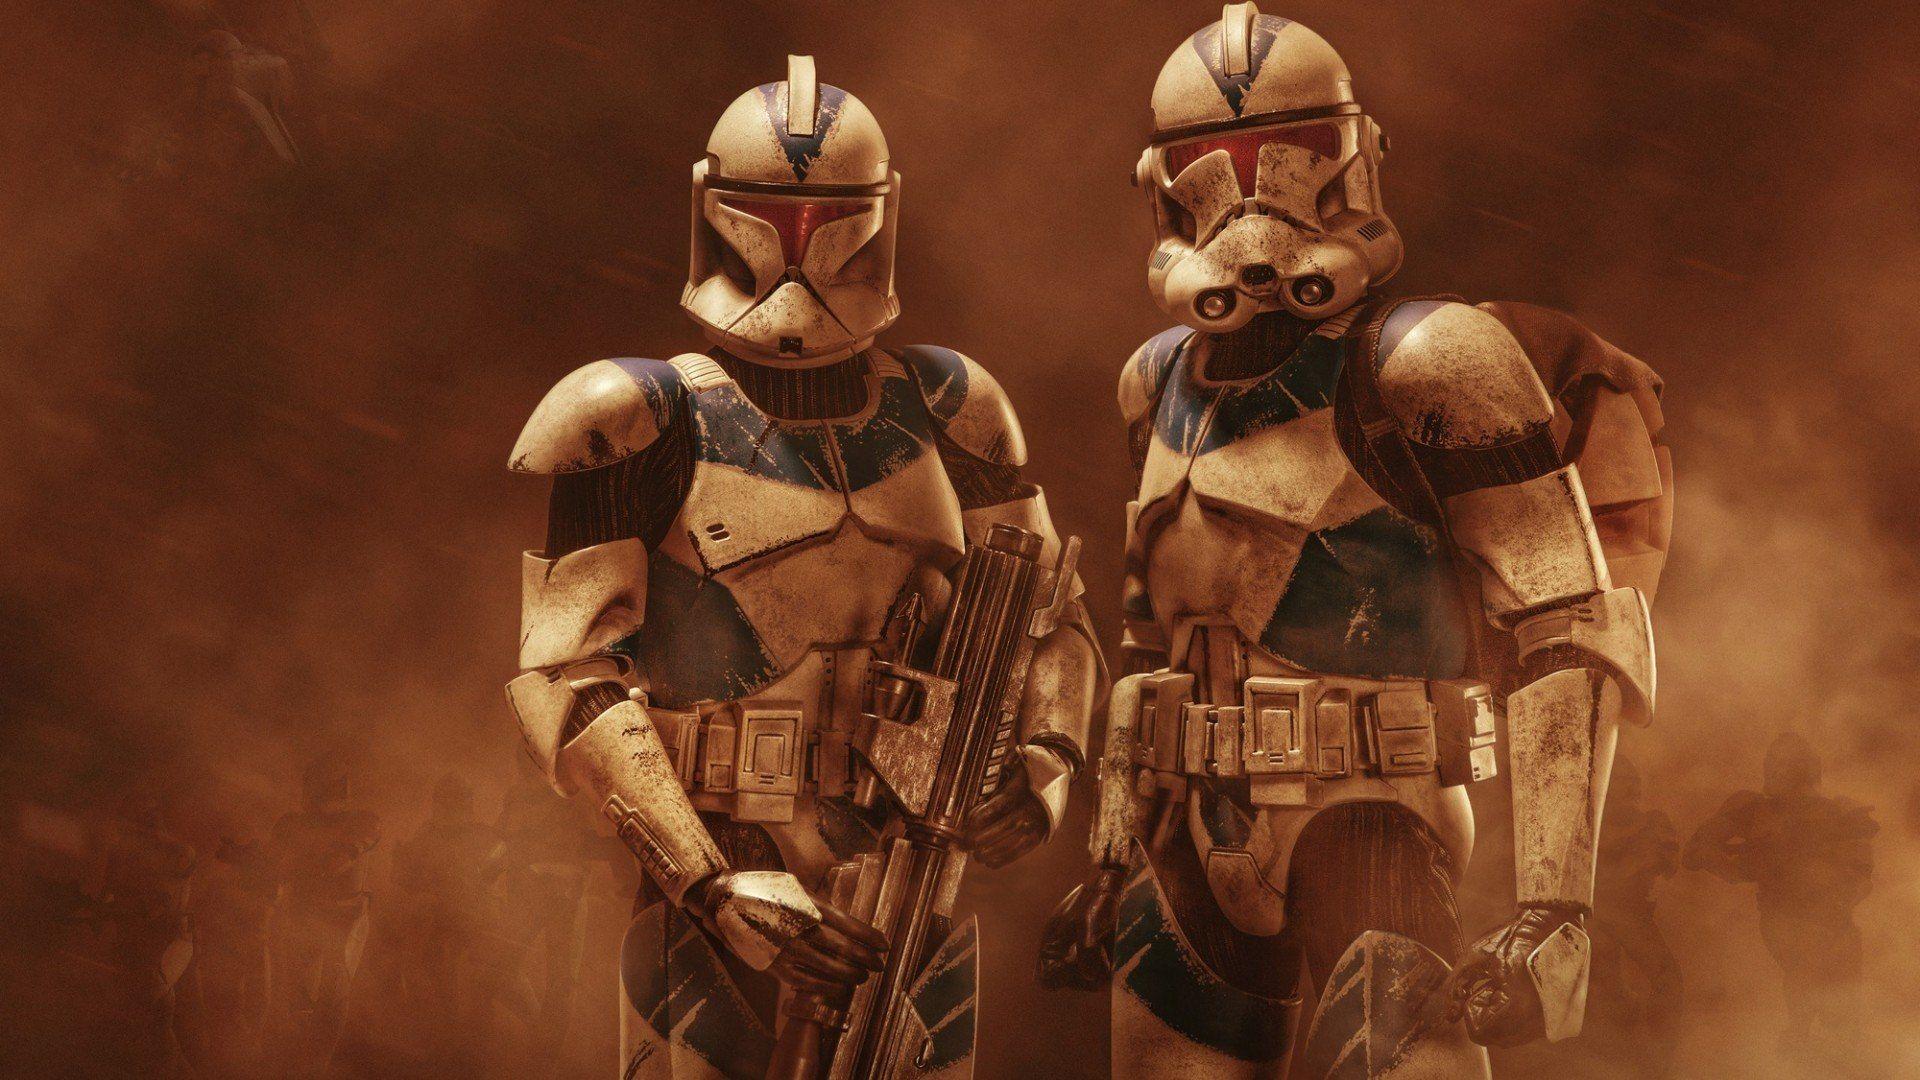 Imperial stormtroopers in Star Wars wallpaper and image